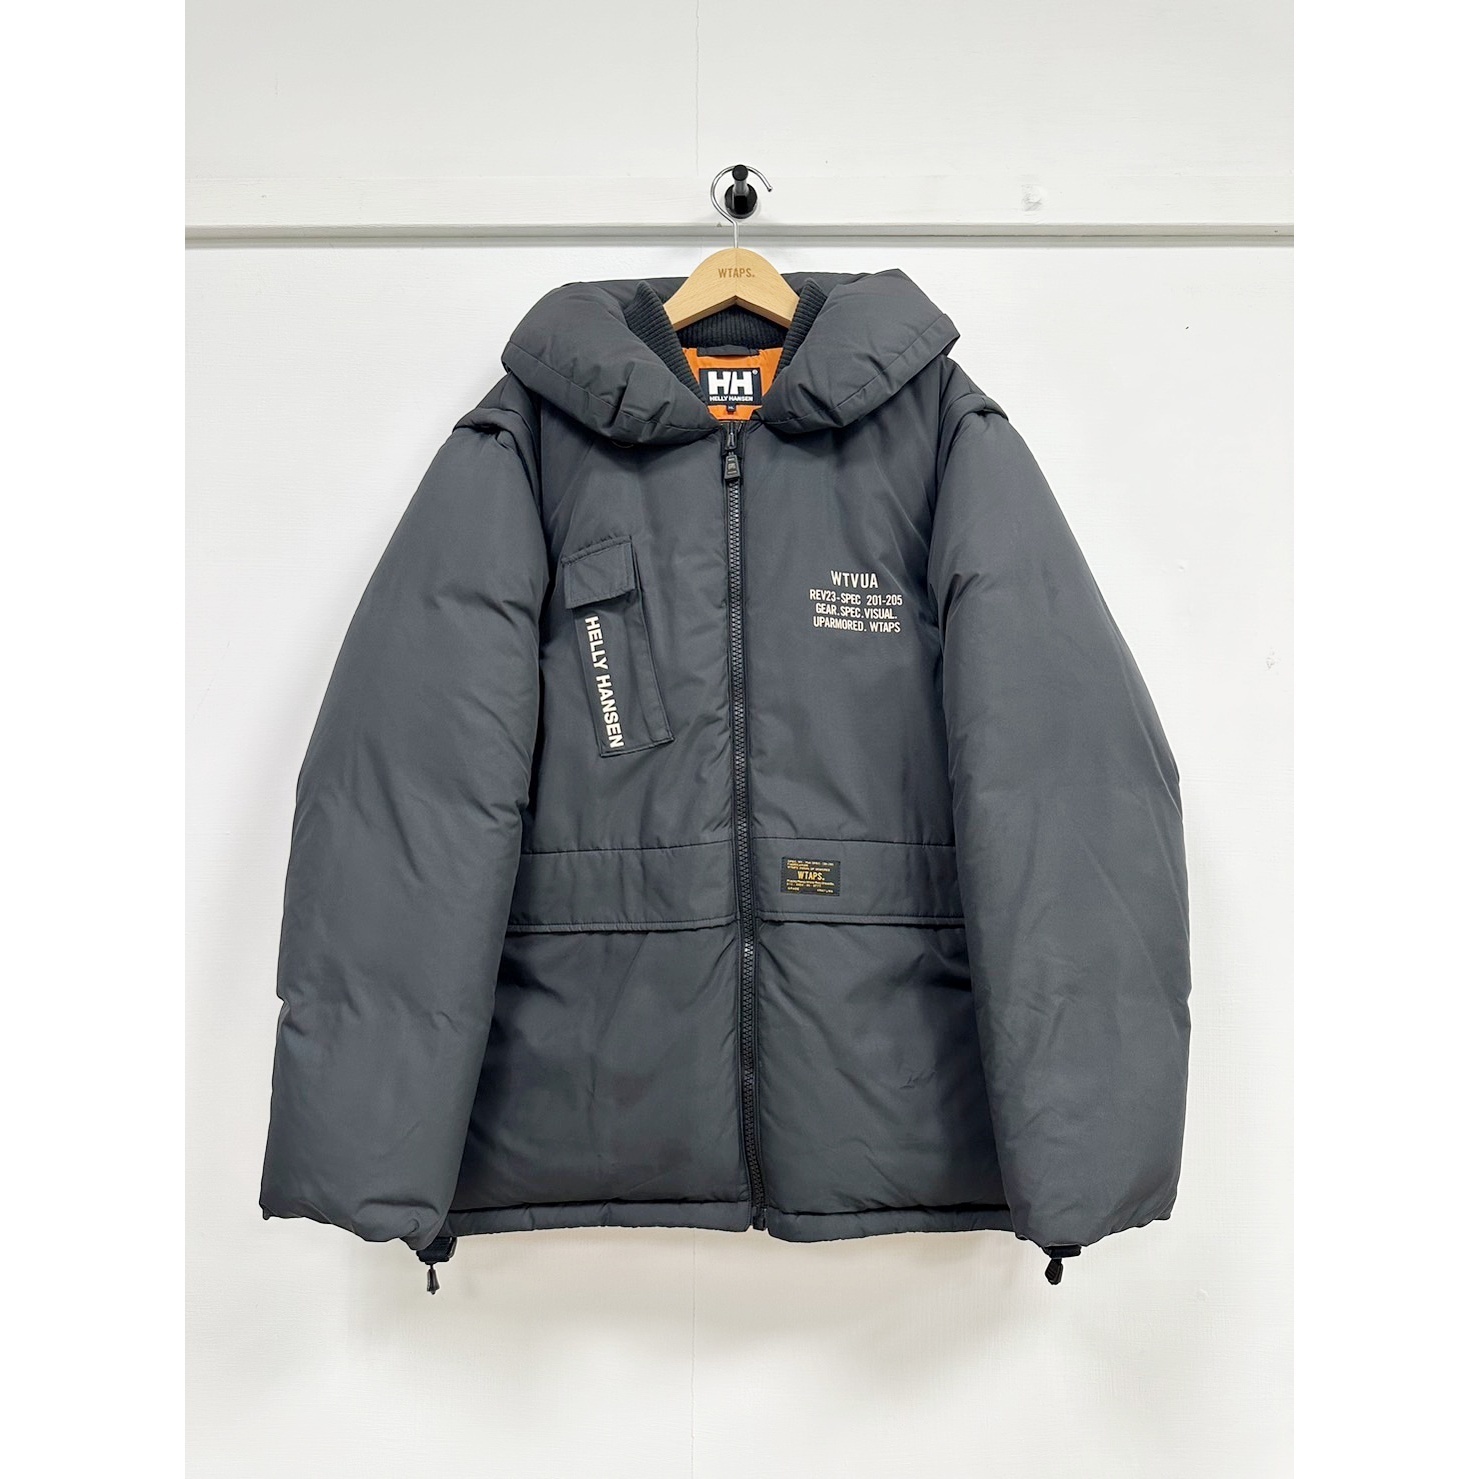 WTAPS 16AW PBS JACKET 羽絨外套黑色XL號– Second Chance - Reuse shop